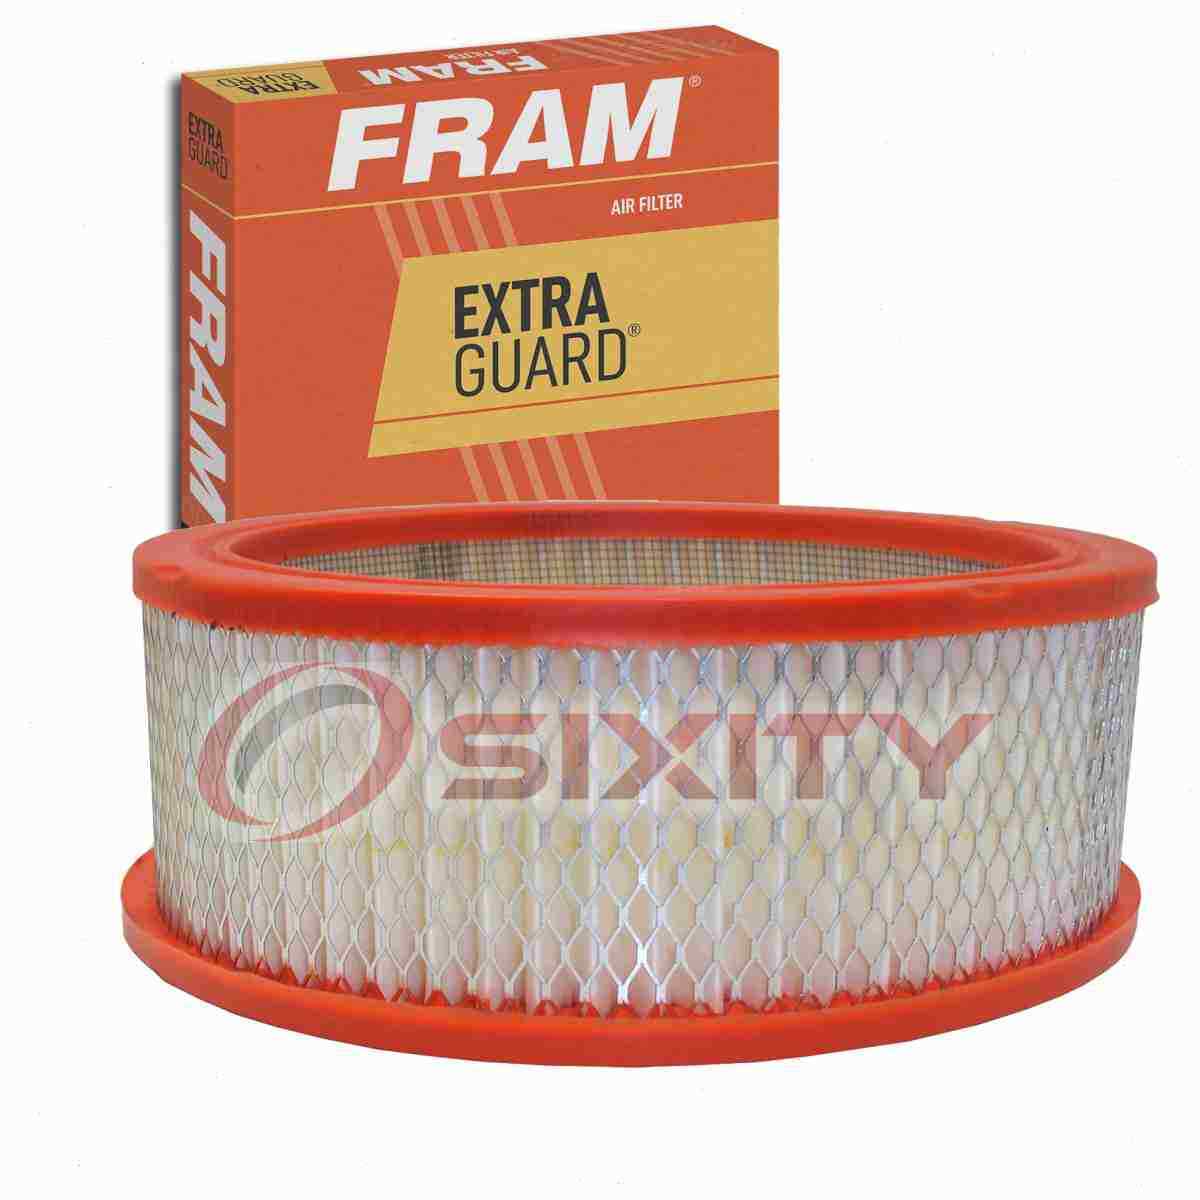 FRAM Extra Guard Air Filter for 1977-1978 Dodge Monaco Intake Inlet Manifold gz